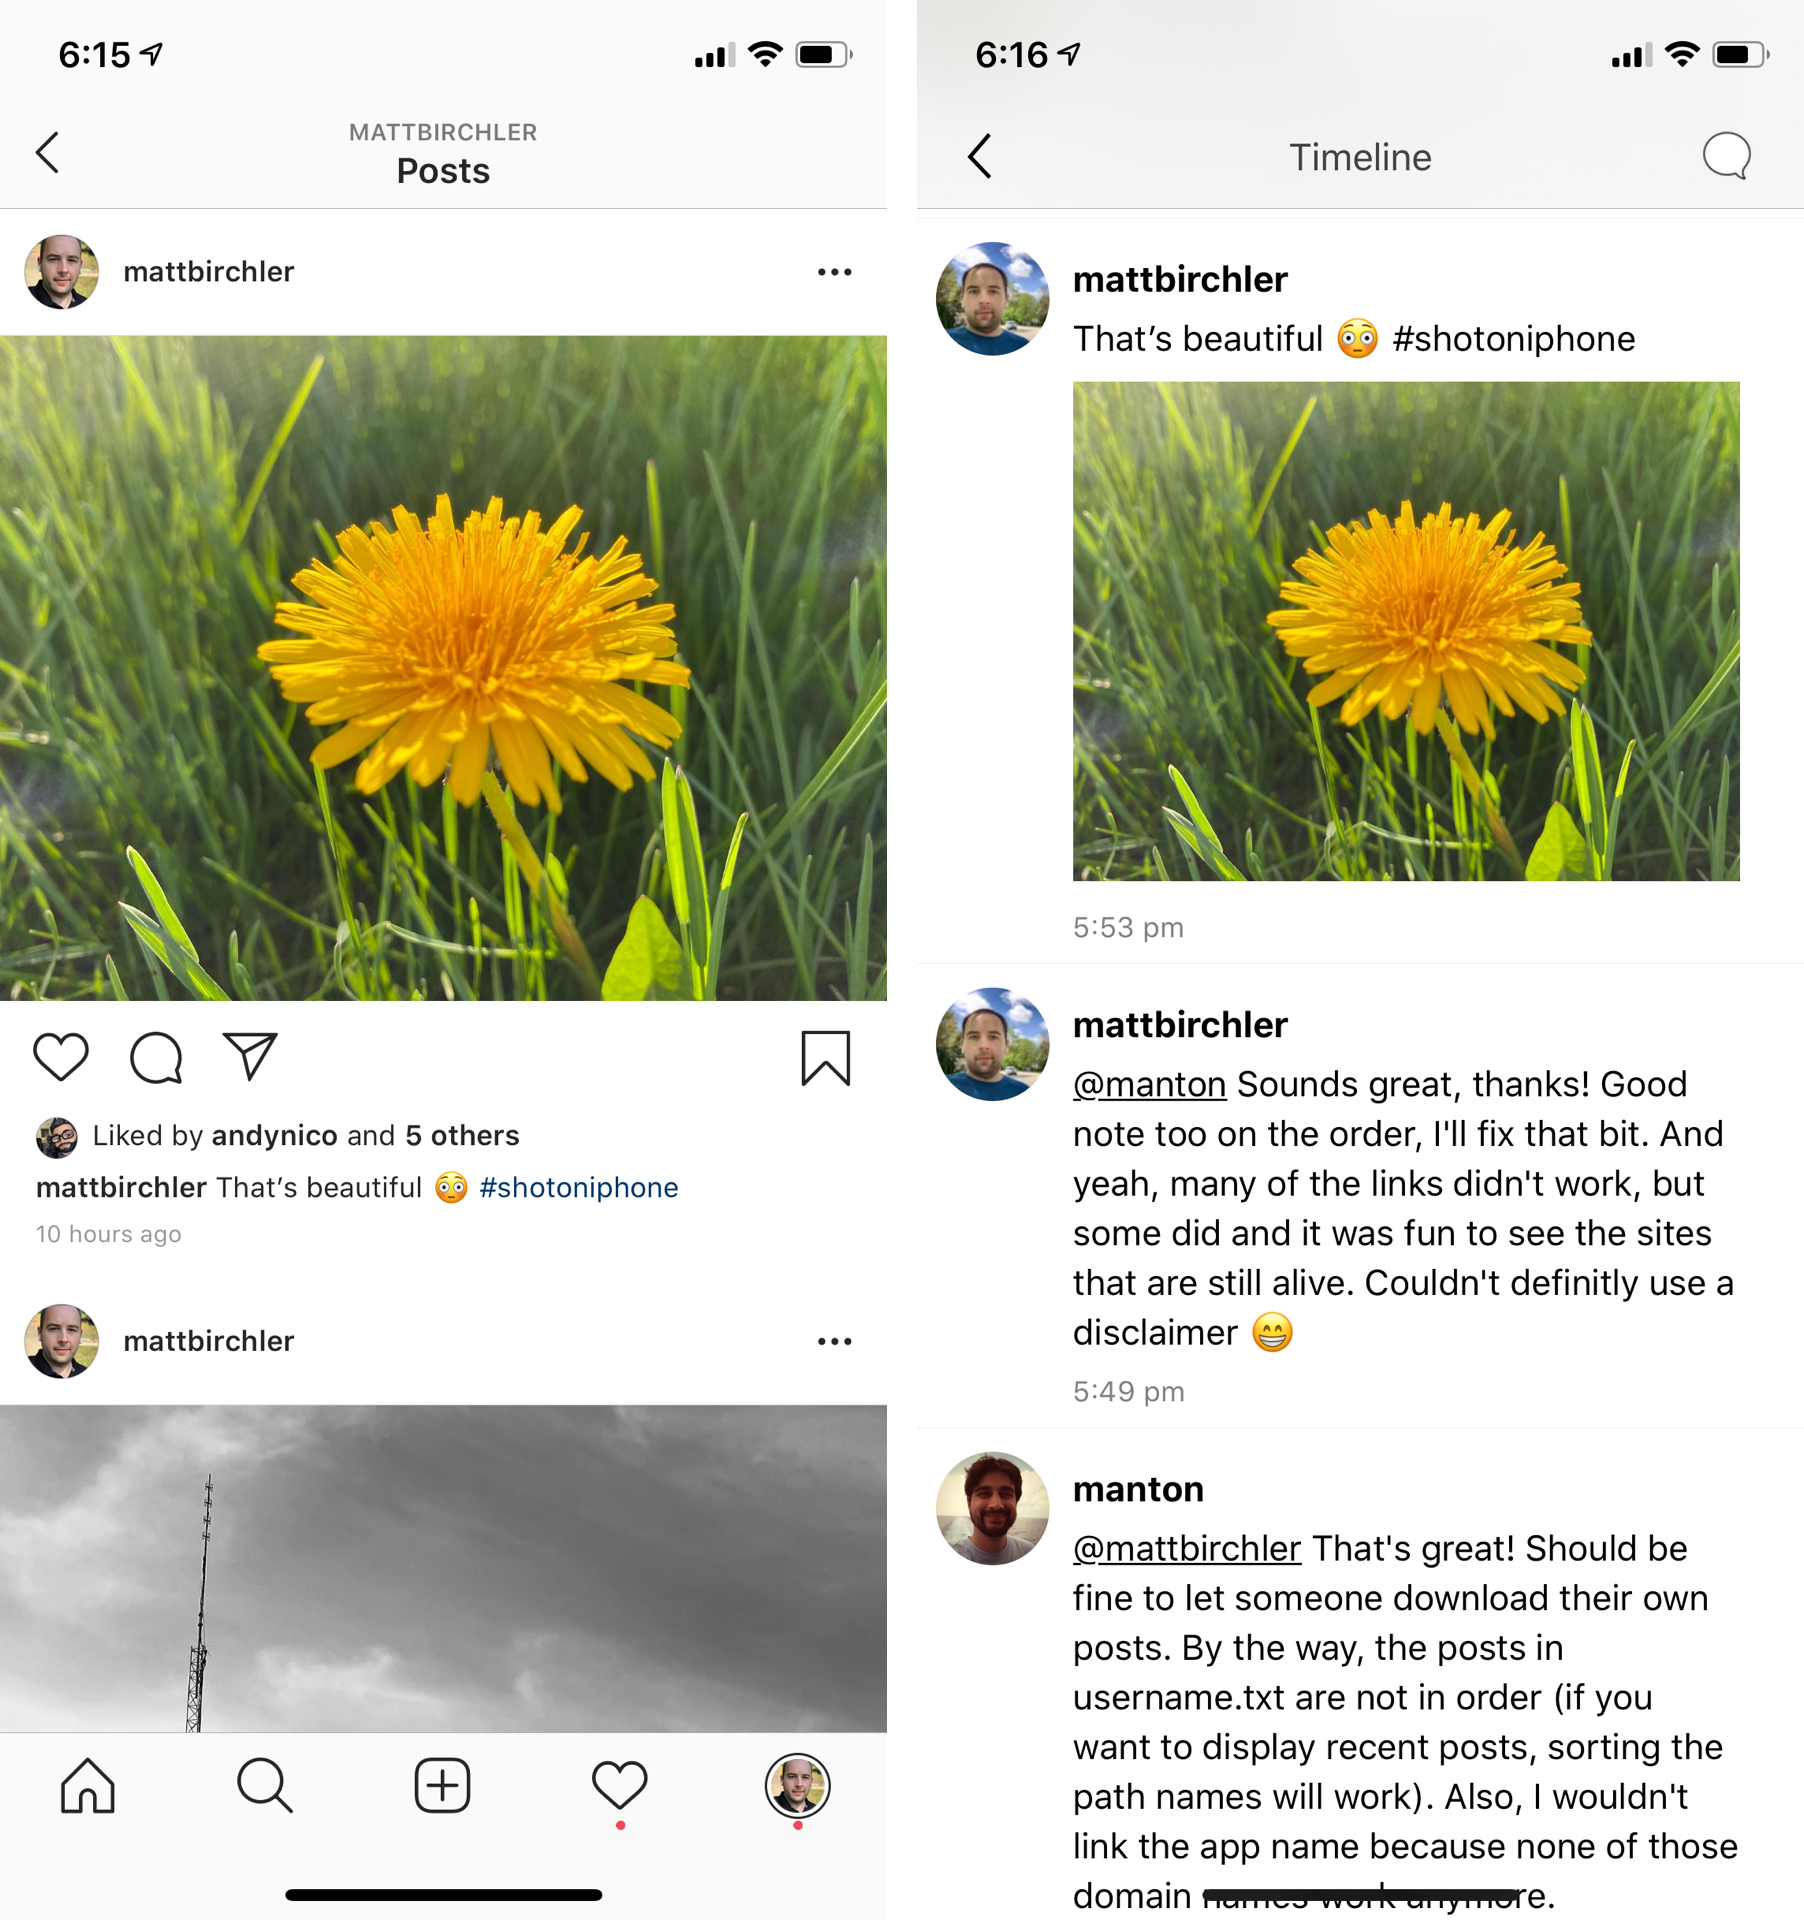 How to Post to from Instagram to Micro.blog using Zapier Premium